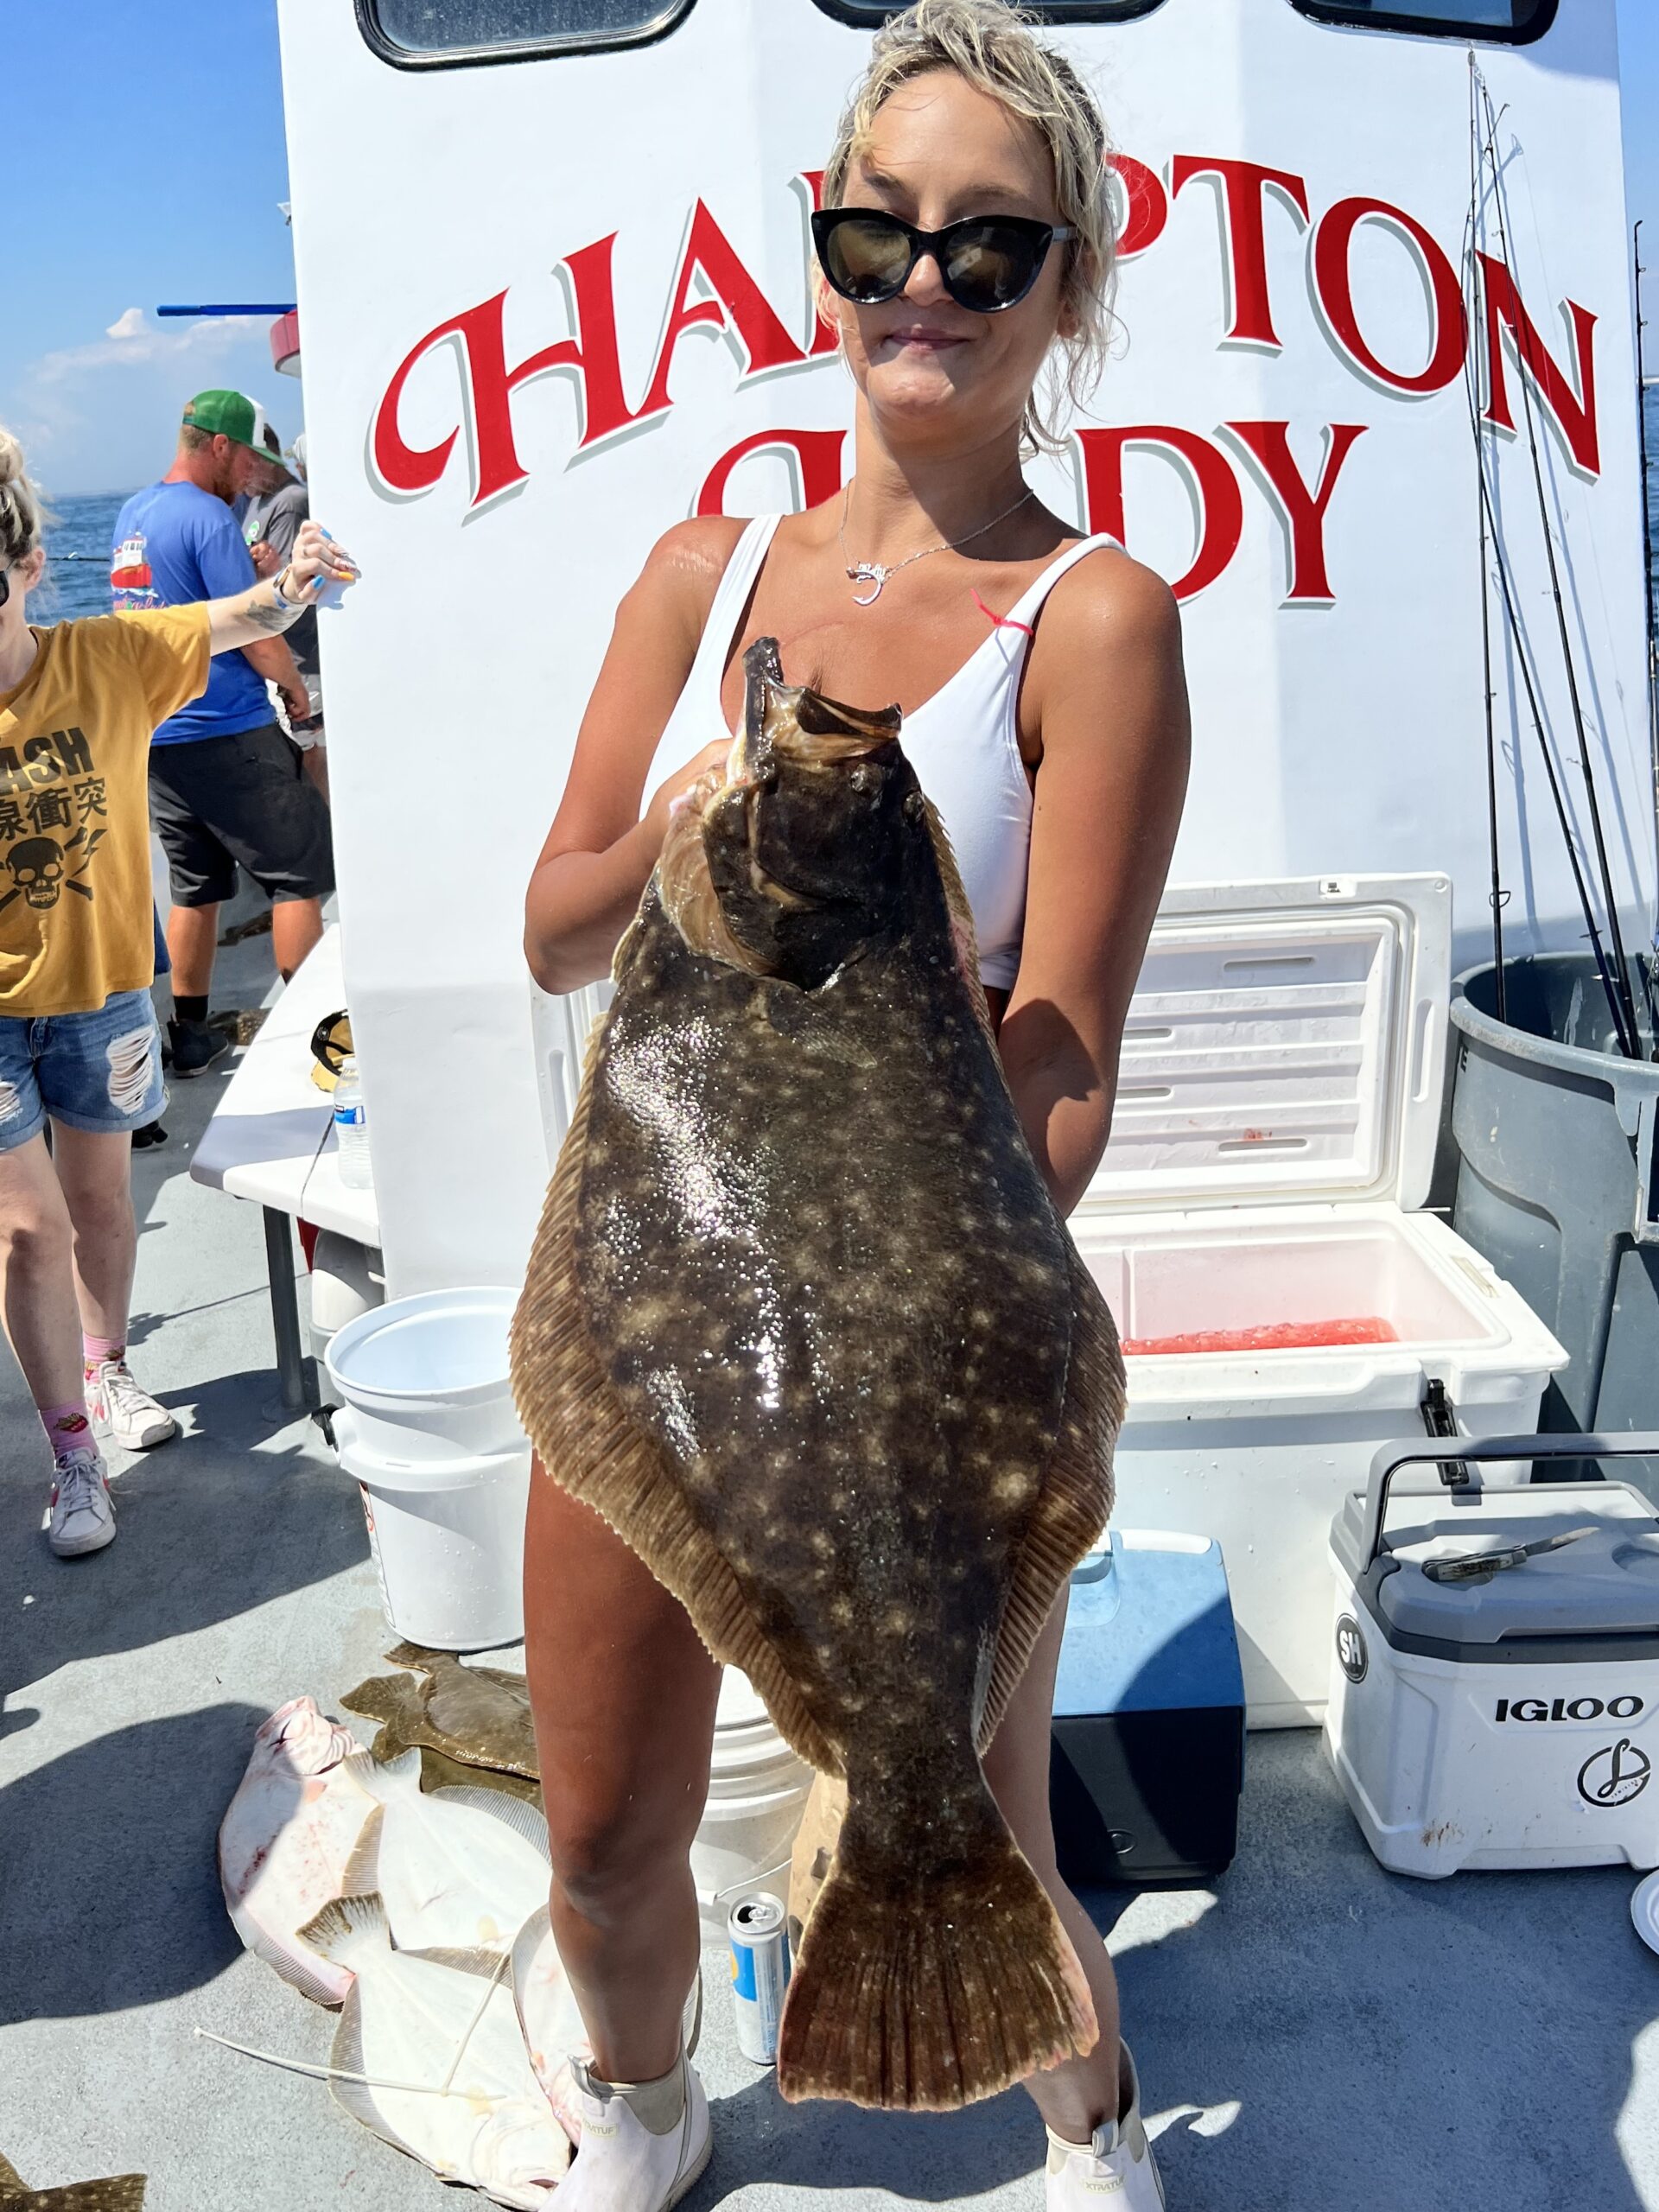 Megan Pfautz, who died just before Christmas, was a fixture on many of the local party boats over the last several years, especially the Hampton Lady out of Hampton Bays and the Hammer Time in Montauk.
Capt. James Foley